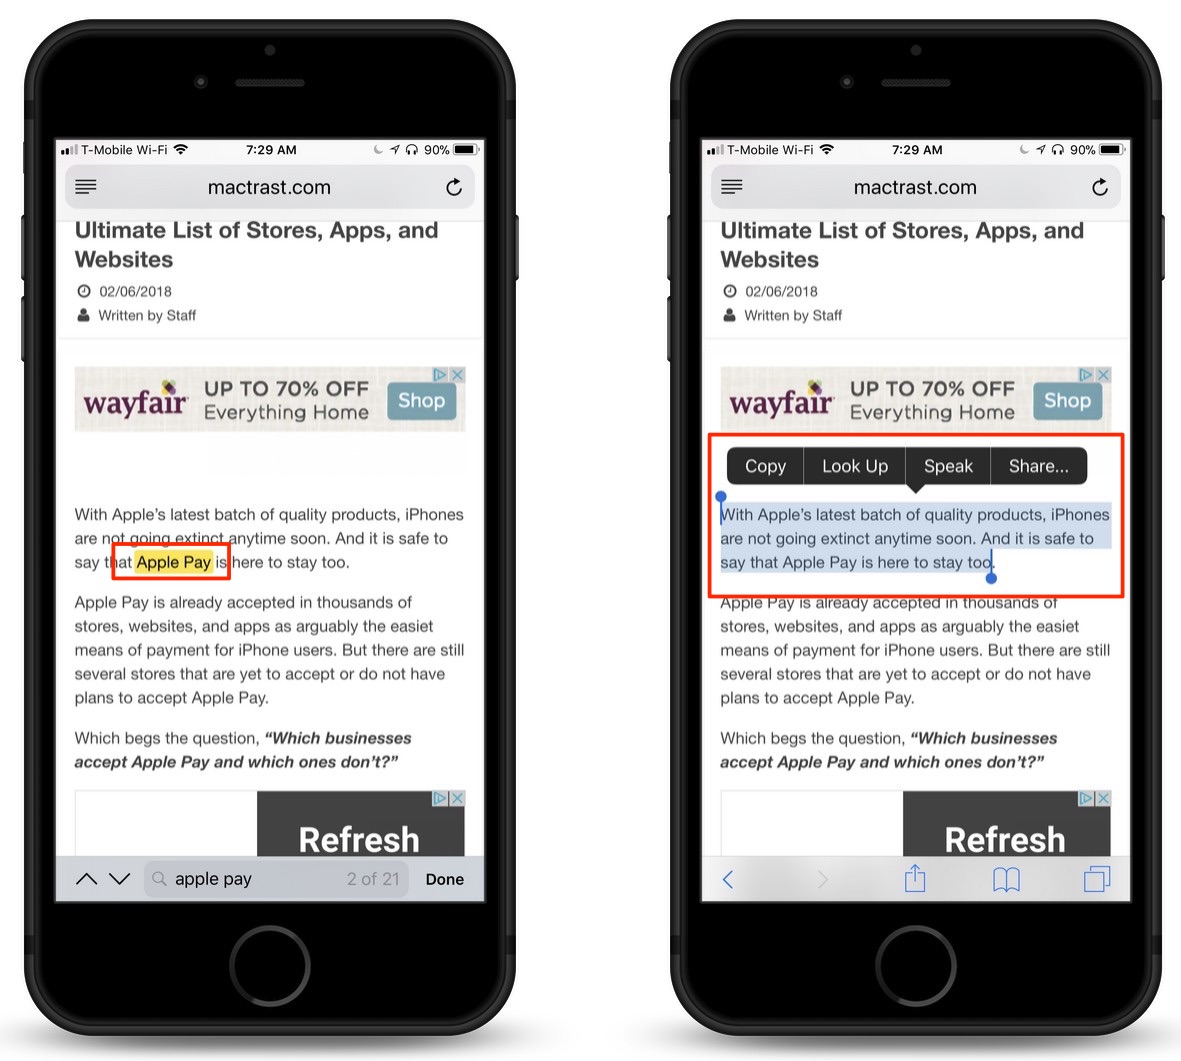 safari iphone how to search for text